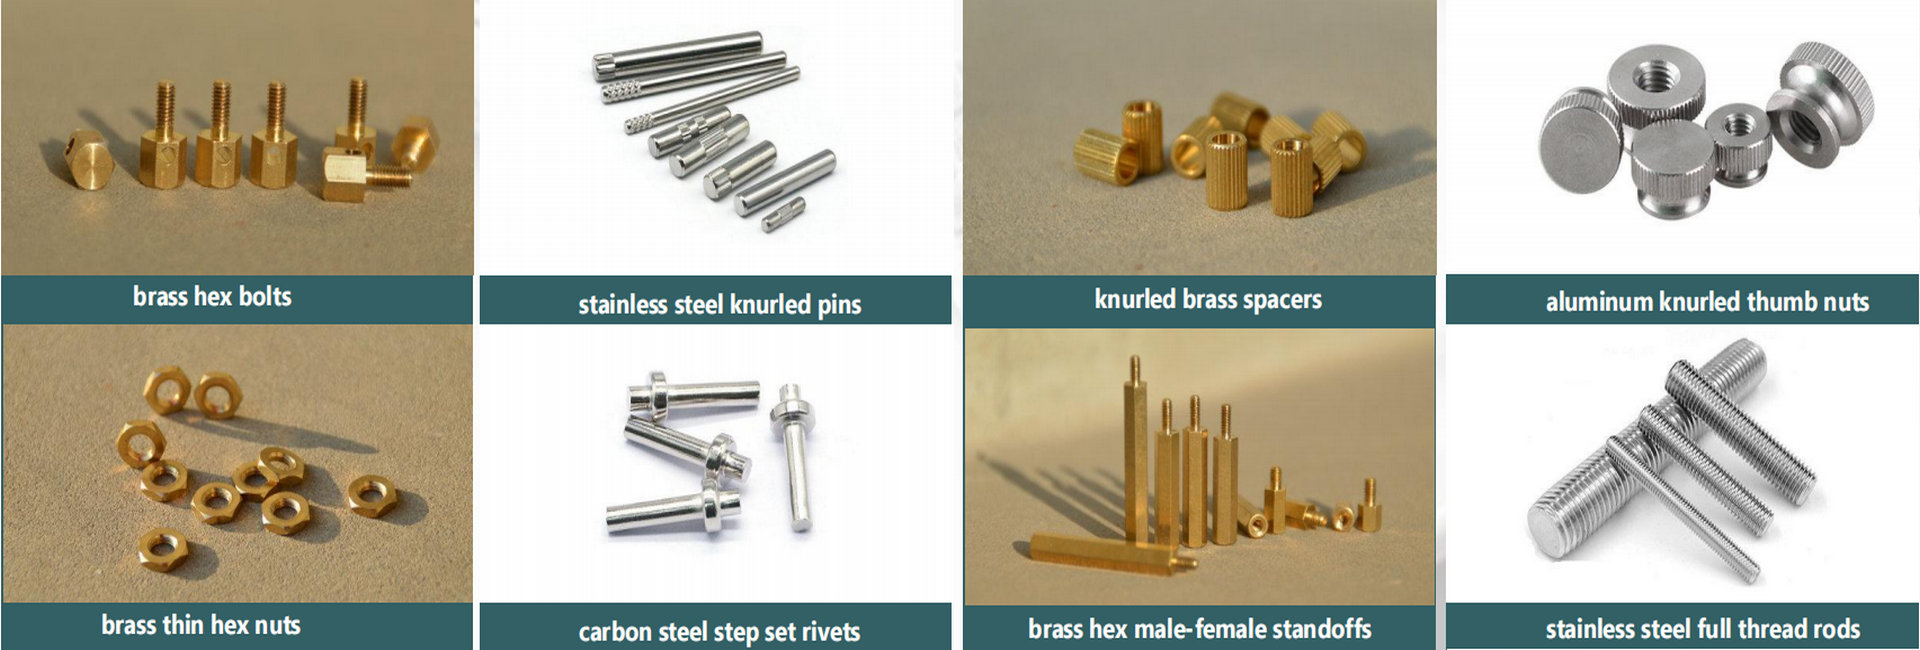 tailor-made precision screw machined products and turned parts factory